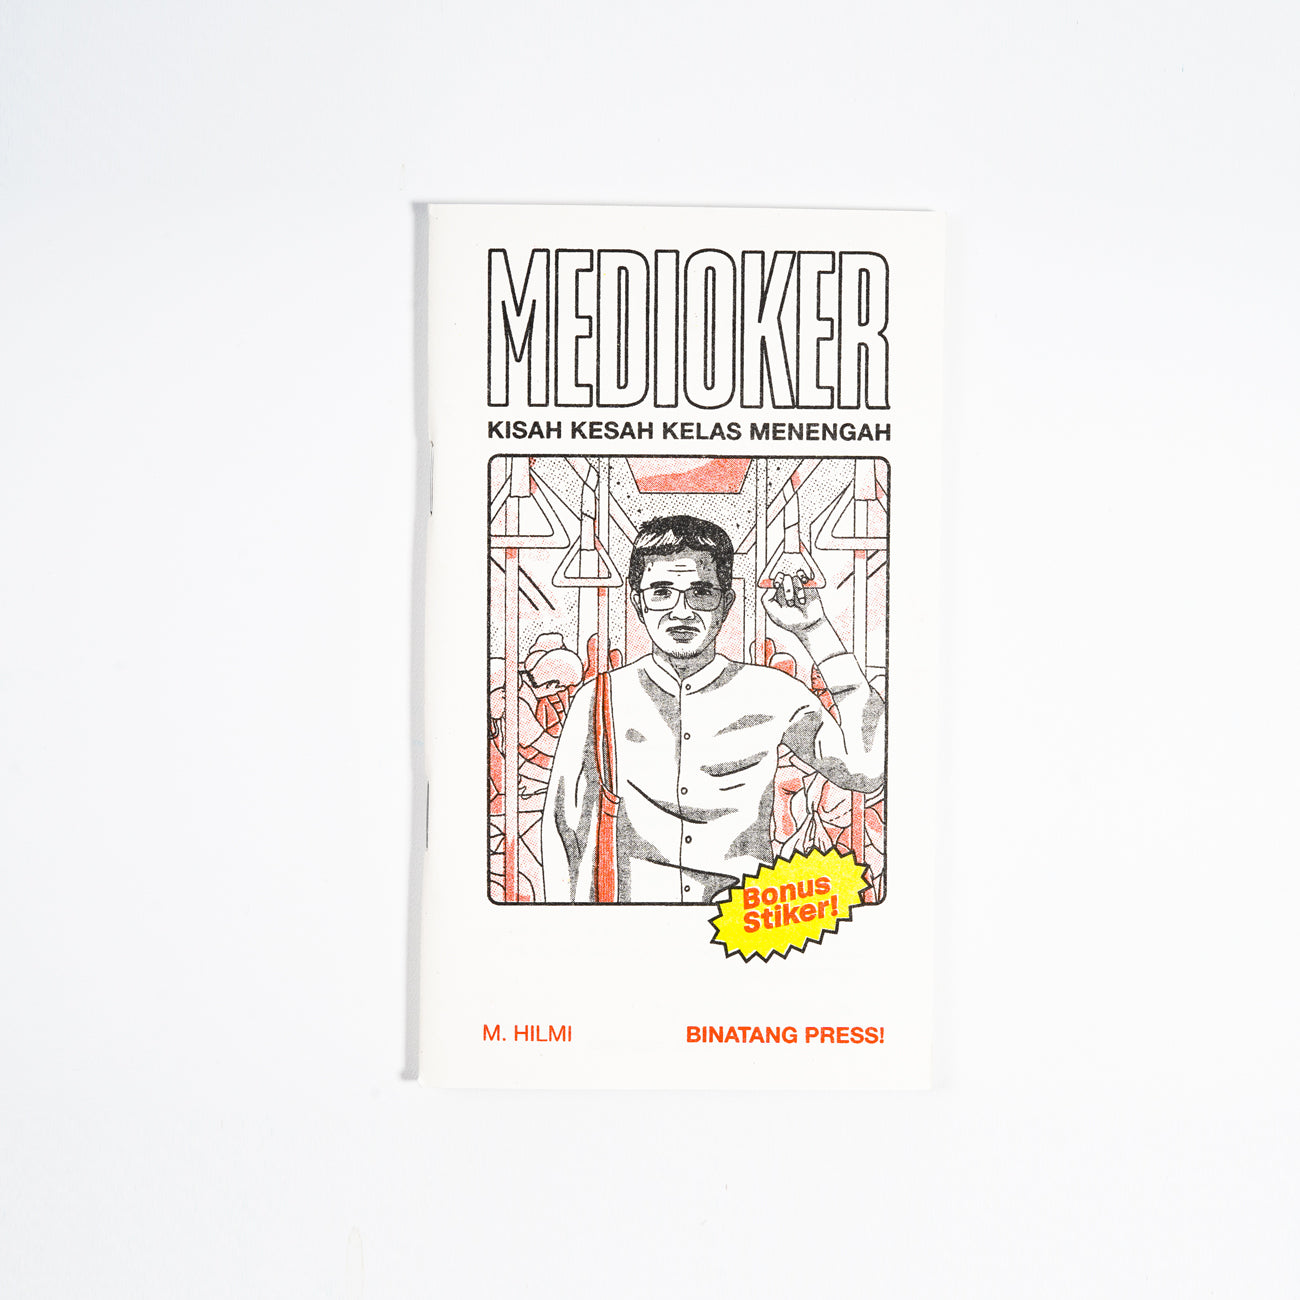 Medioker from M. Hilmi published by Binatang Press